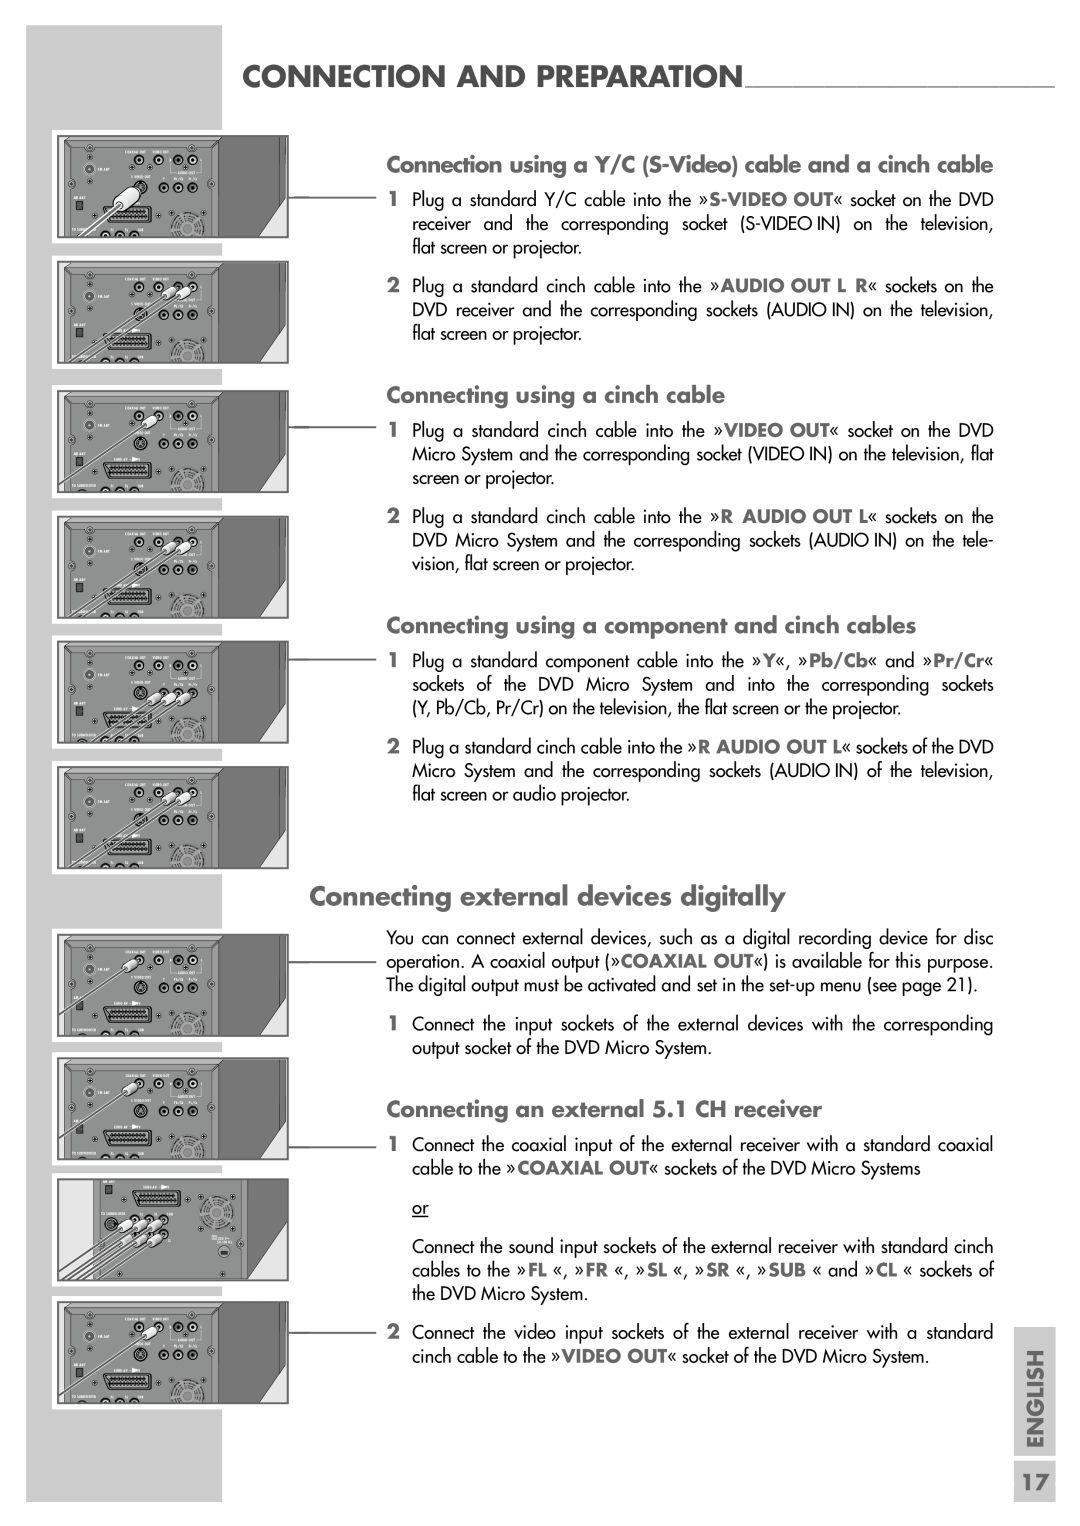 Grundig Scenos UMS 6400 DVD manual Connecting external devices digitally, Connecting an external 5.1 CH receiver, English 